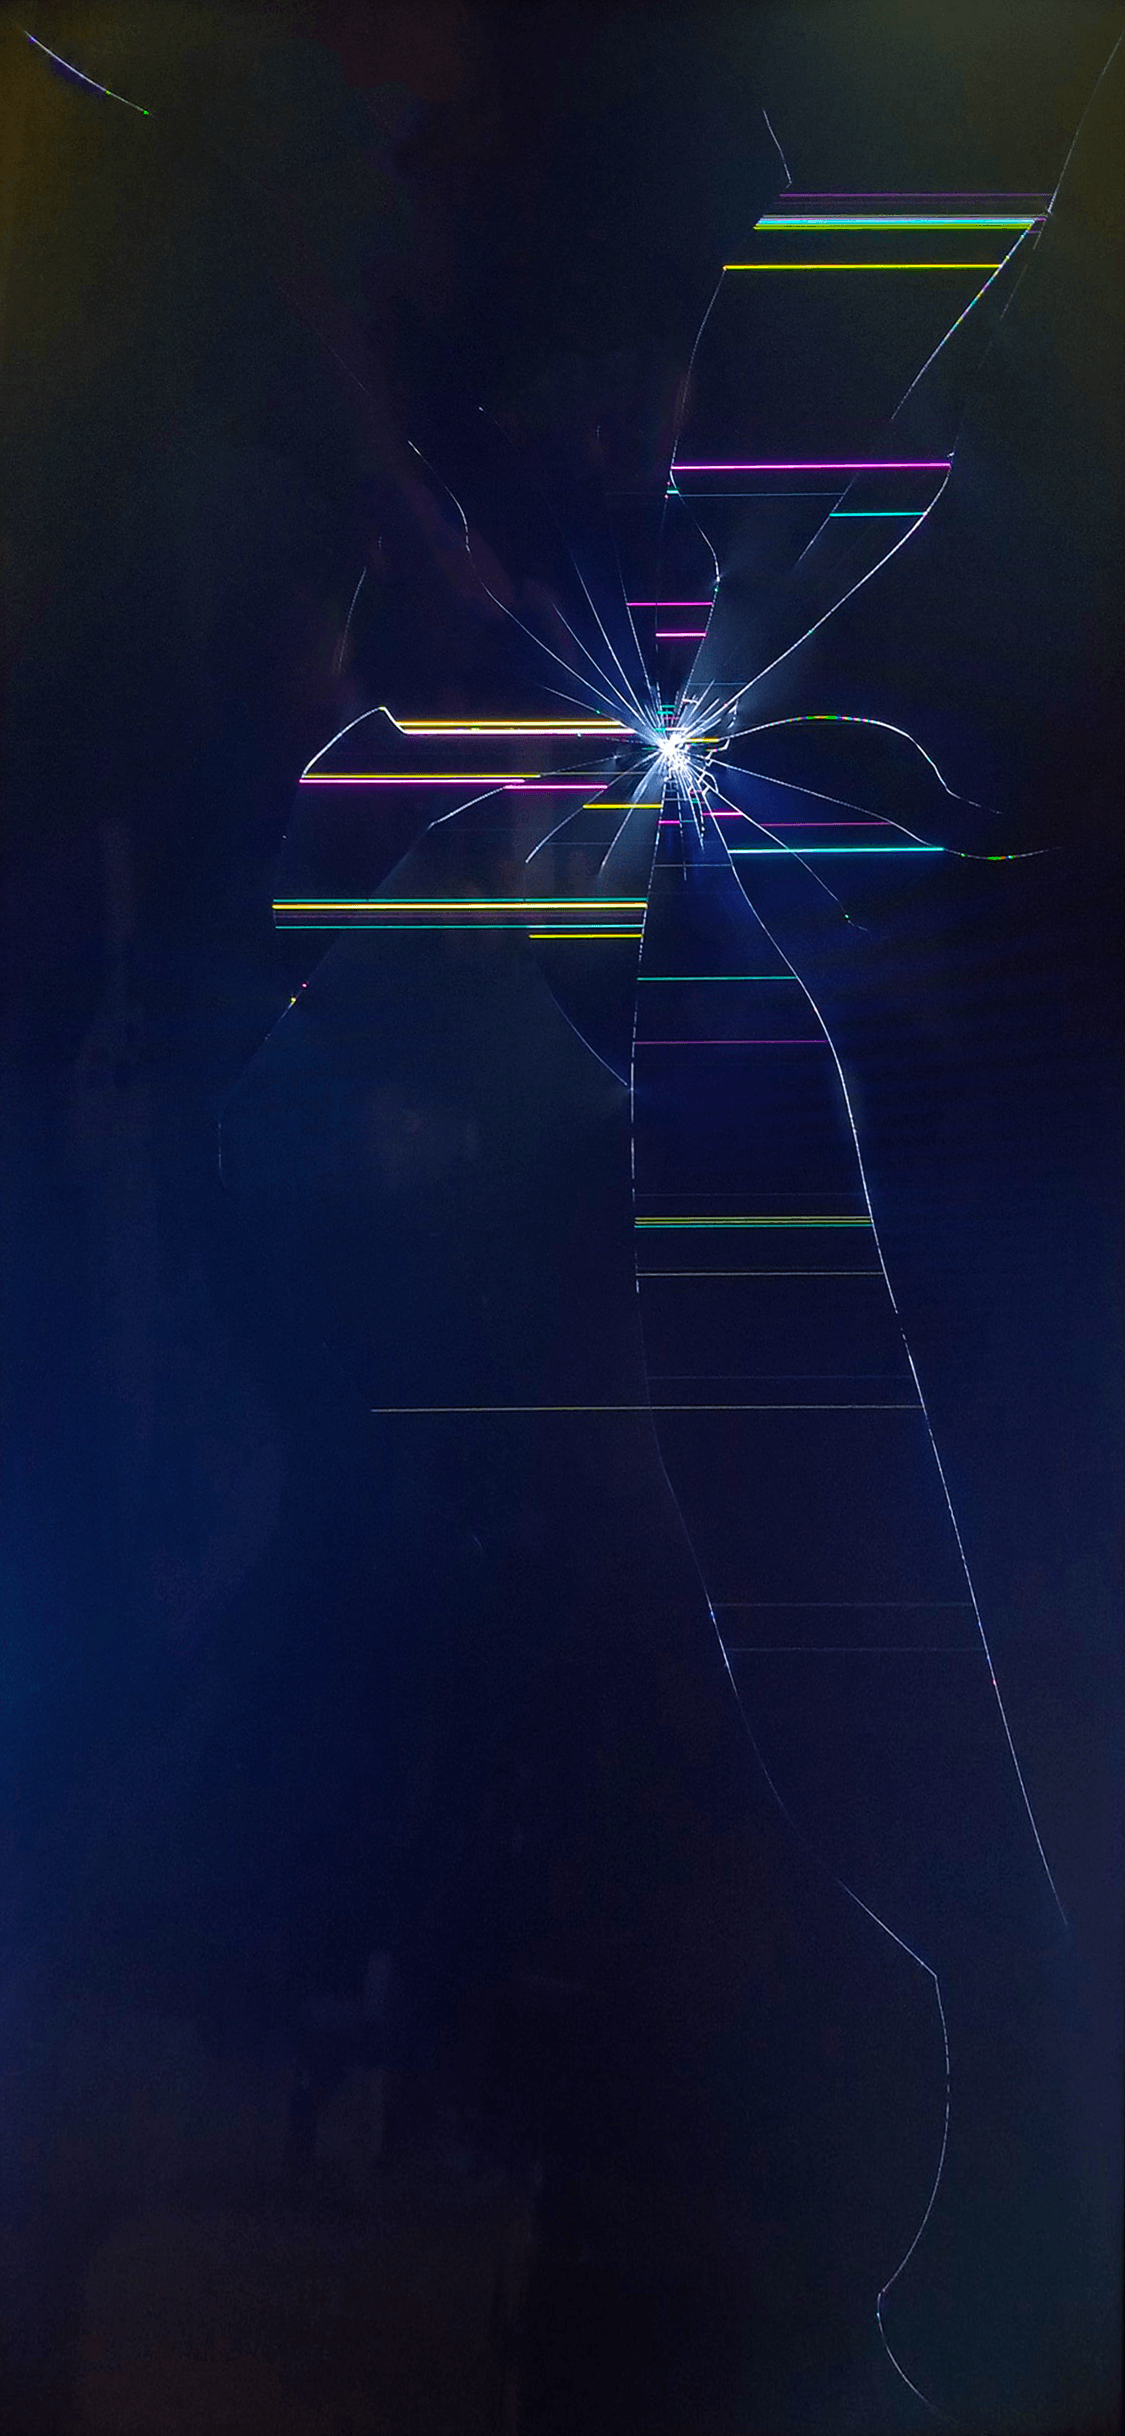 Pretend your phone's screen is cracked with this wallpaper / Boing